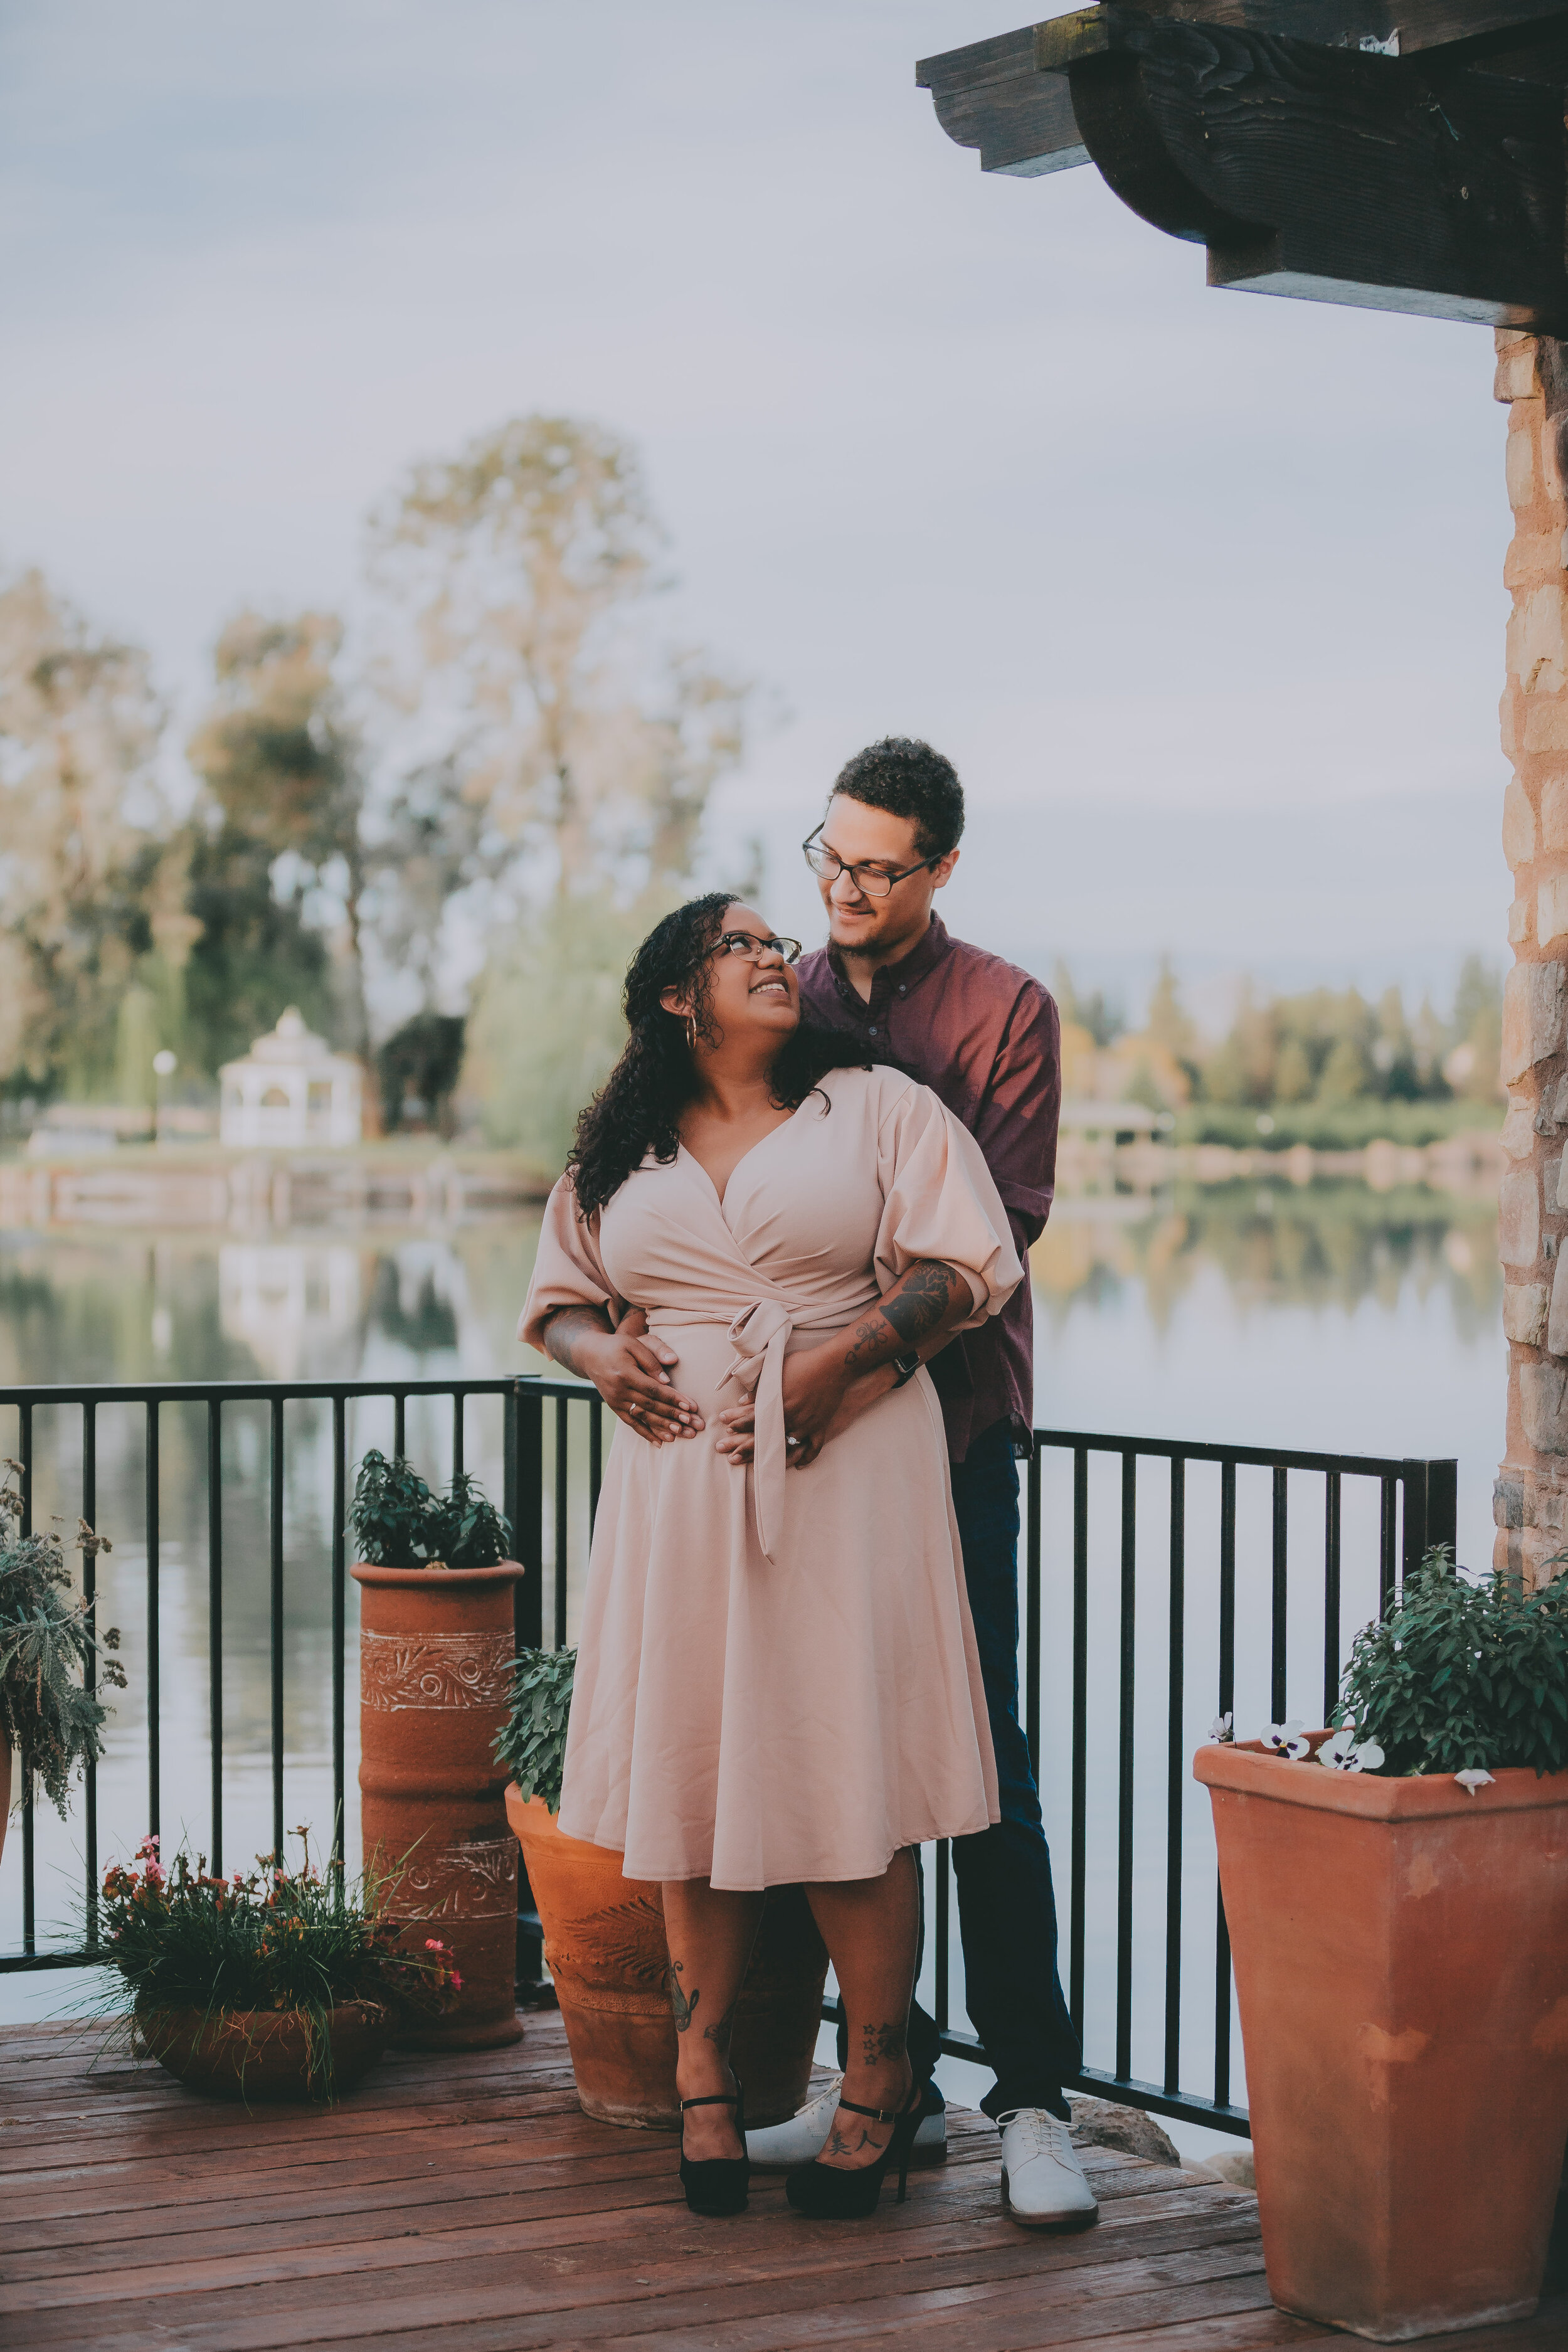 Fresno Engagament Photos - Wolf Lakes - The Clausen Gallery - Aleksis and Scott -10.jpg